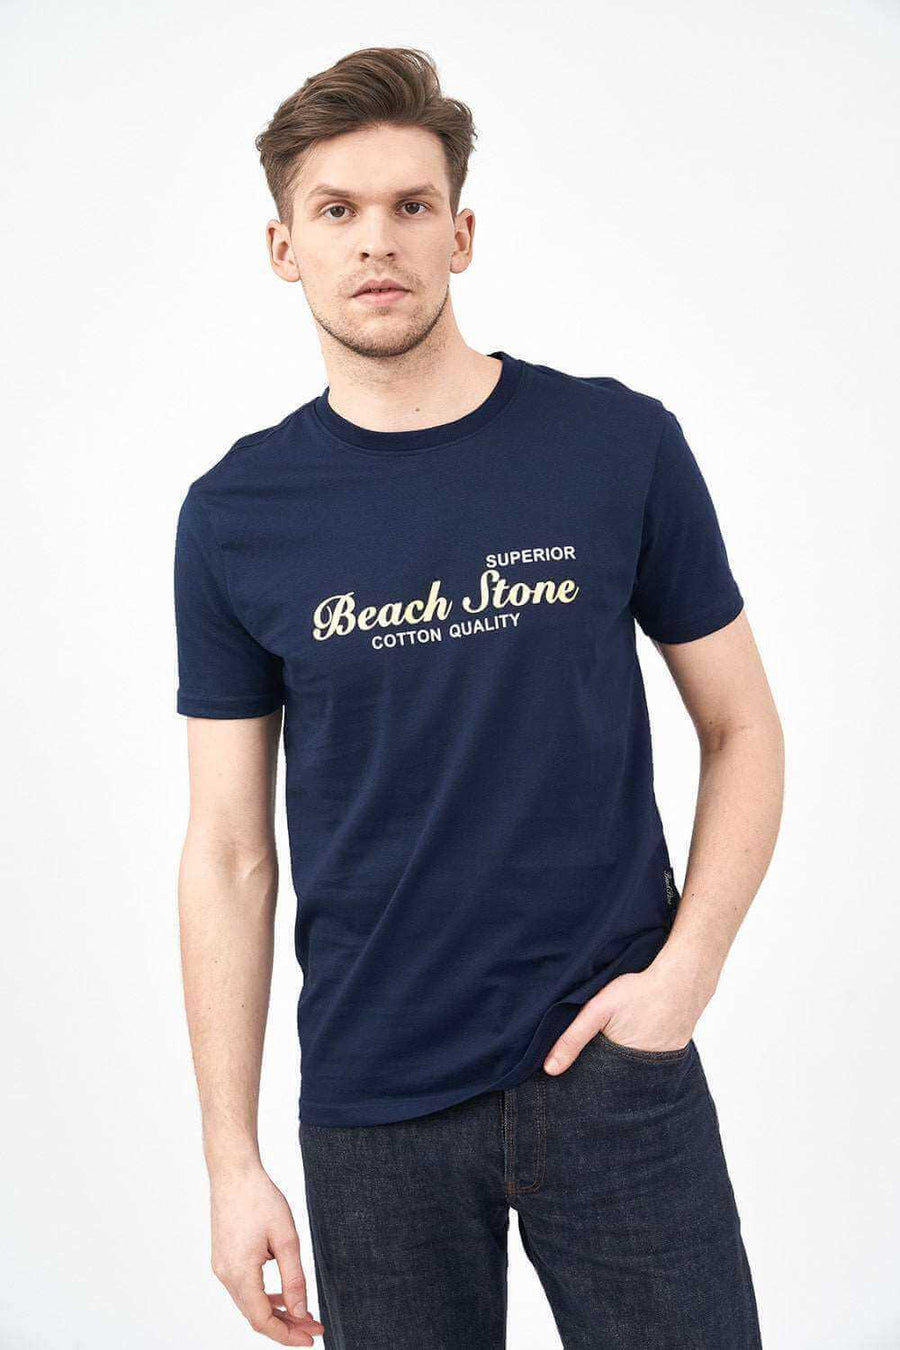 Front Pose of Men's Short Sleeve Shirt in Navy Blue